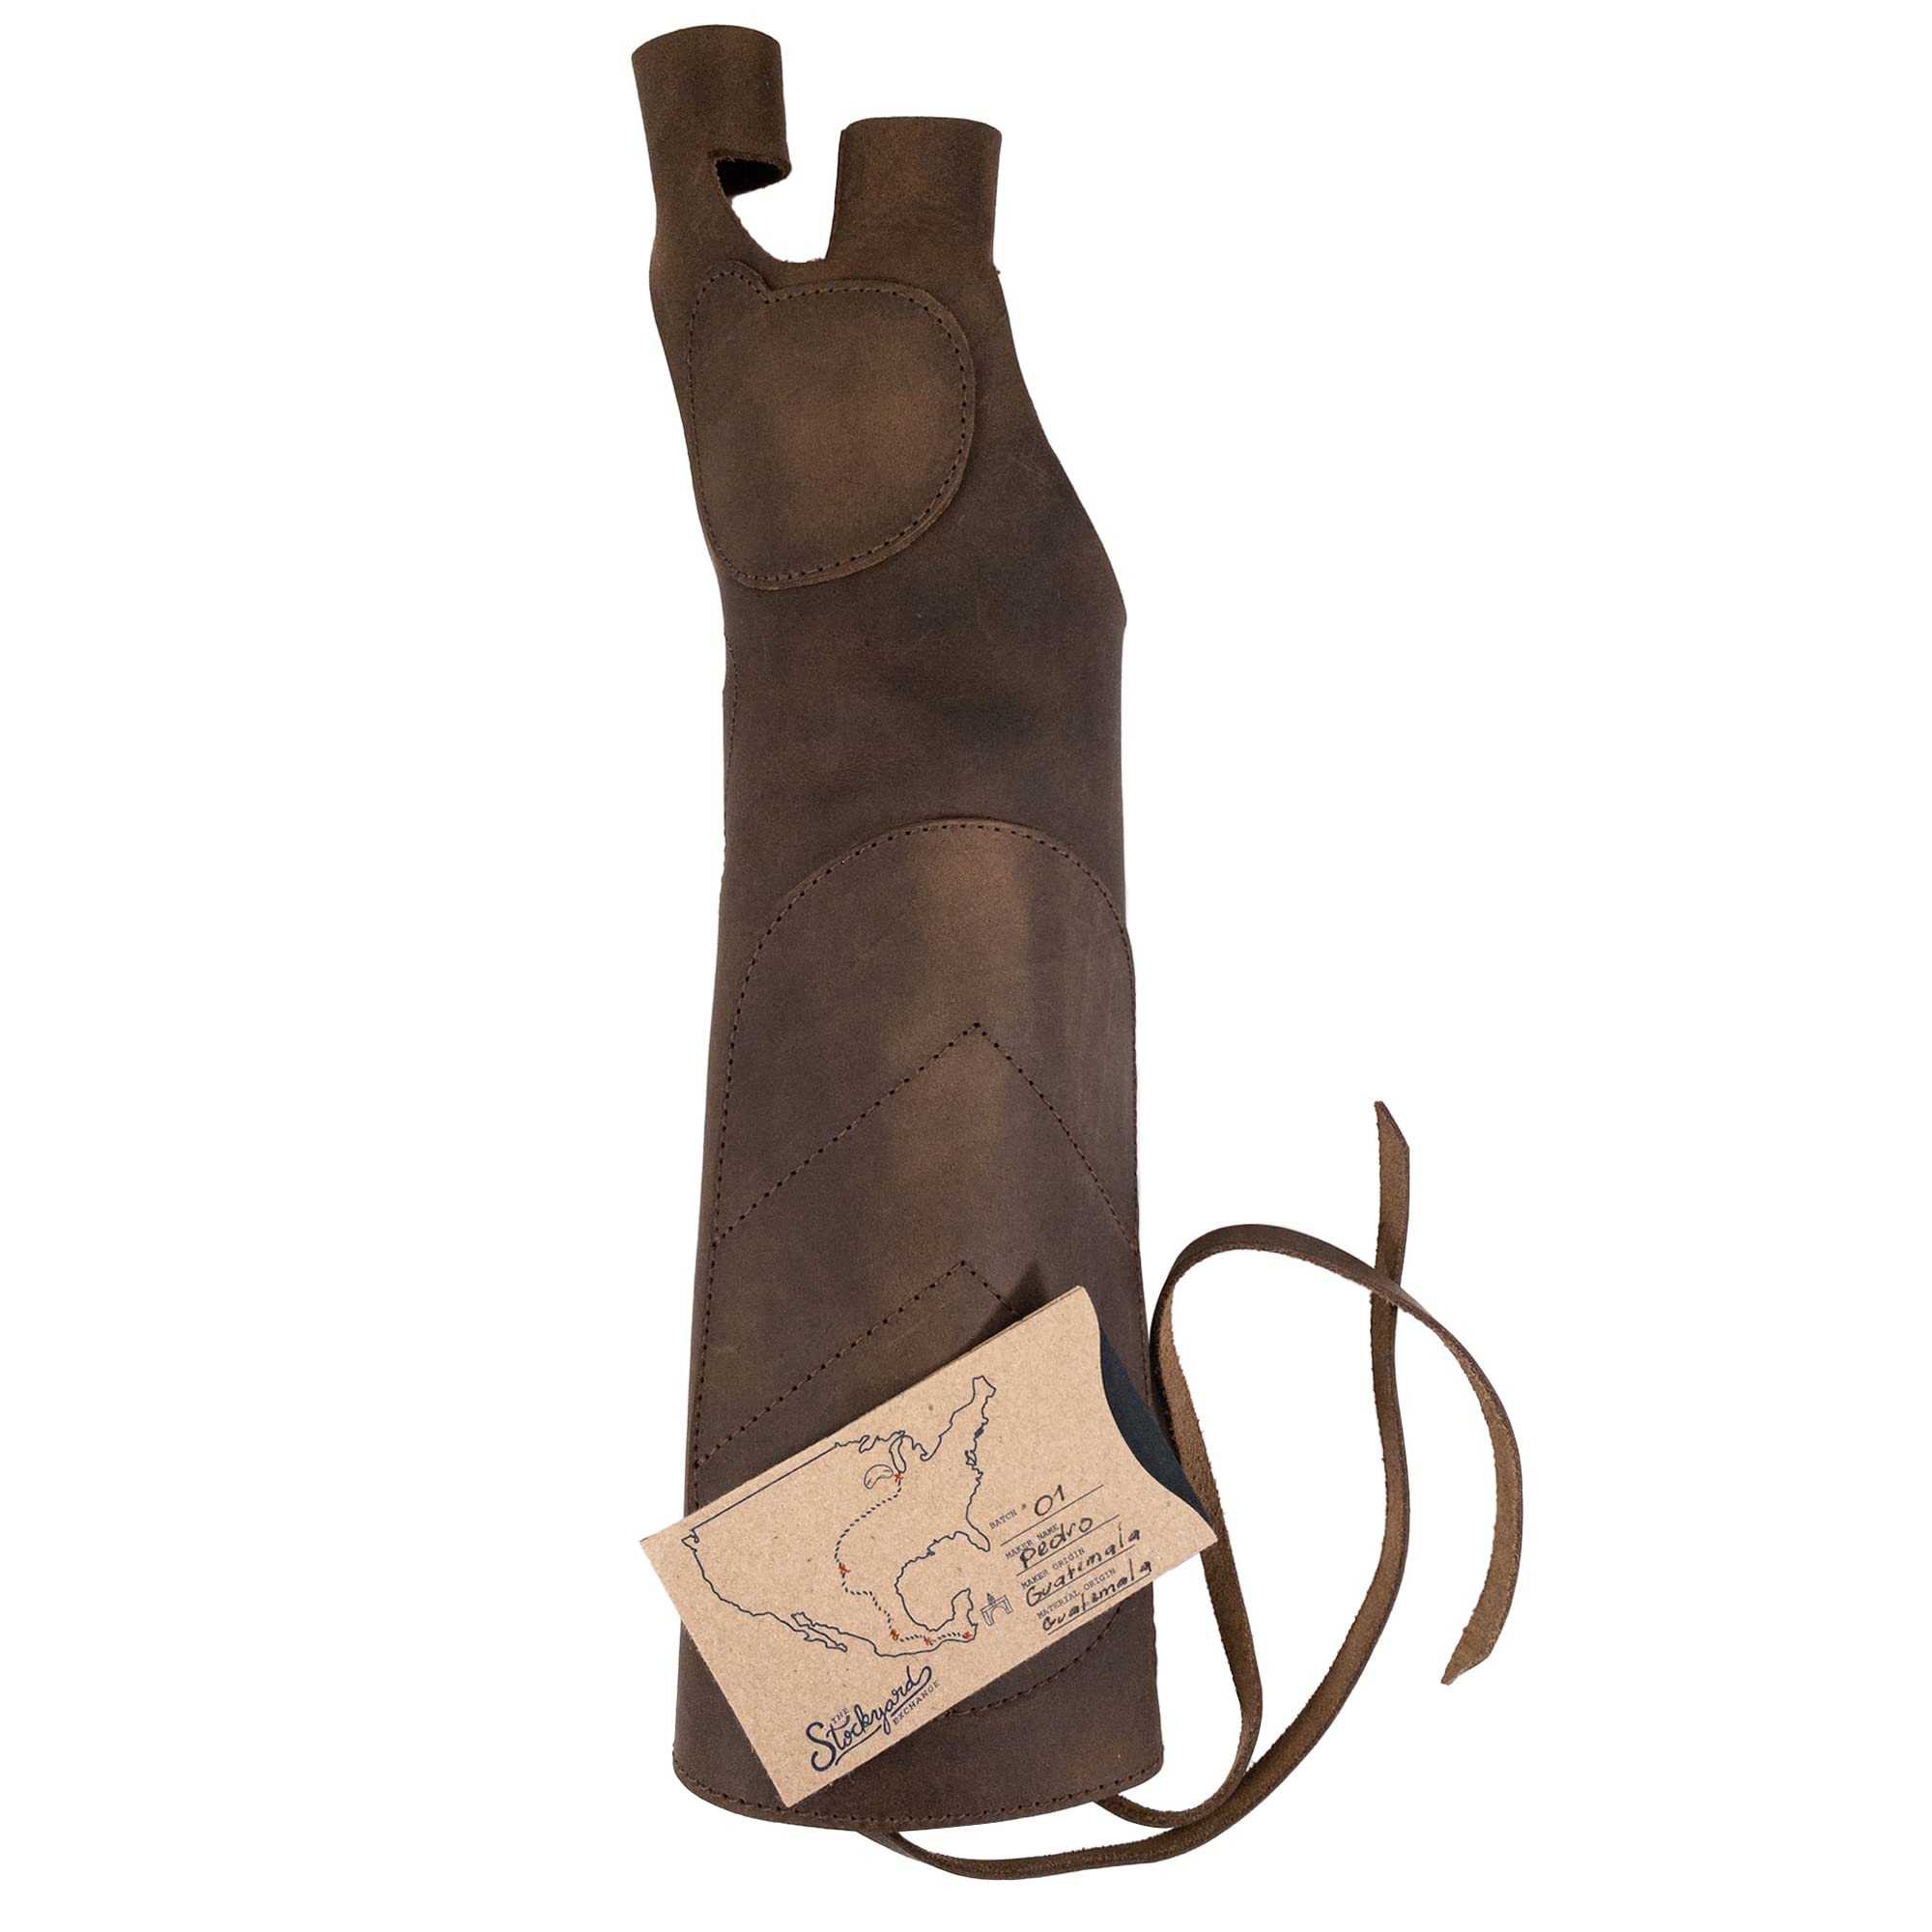 Valhalla Gear, Forearm Guard for Archeries Handmade from Full Grain Leather - Bourbon Brown